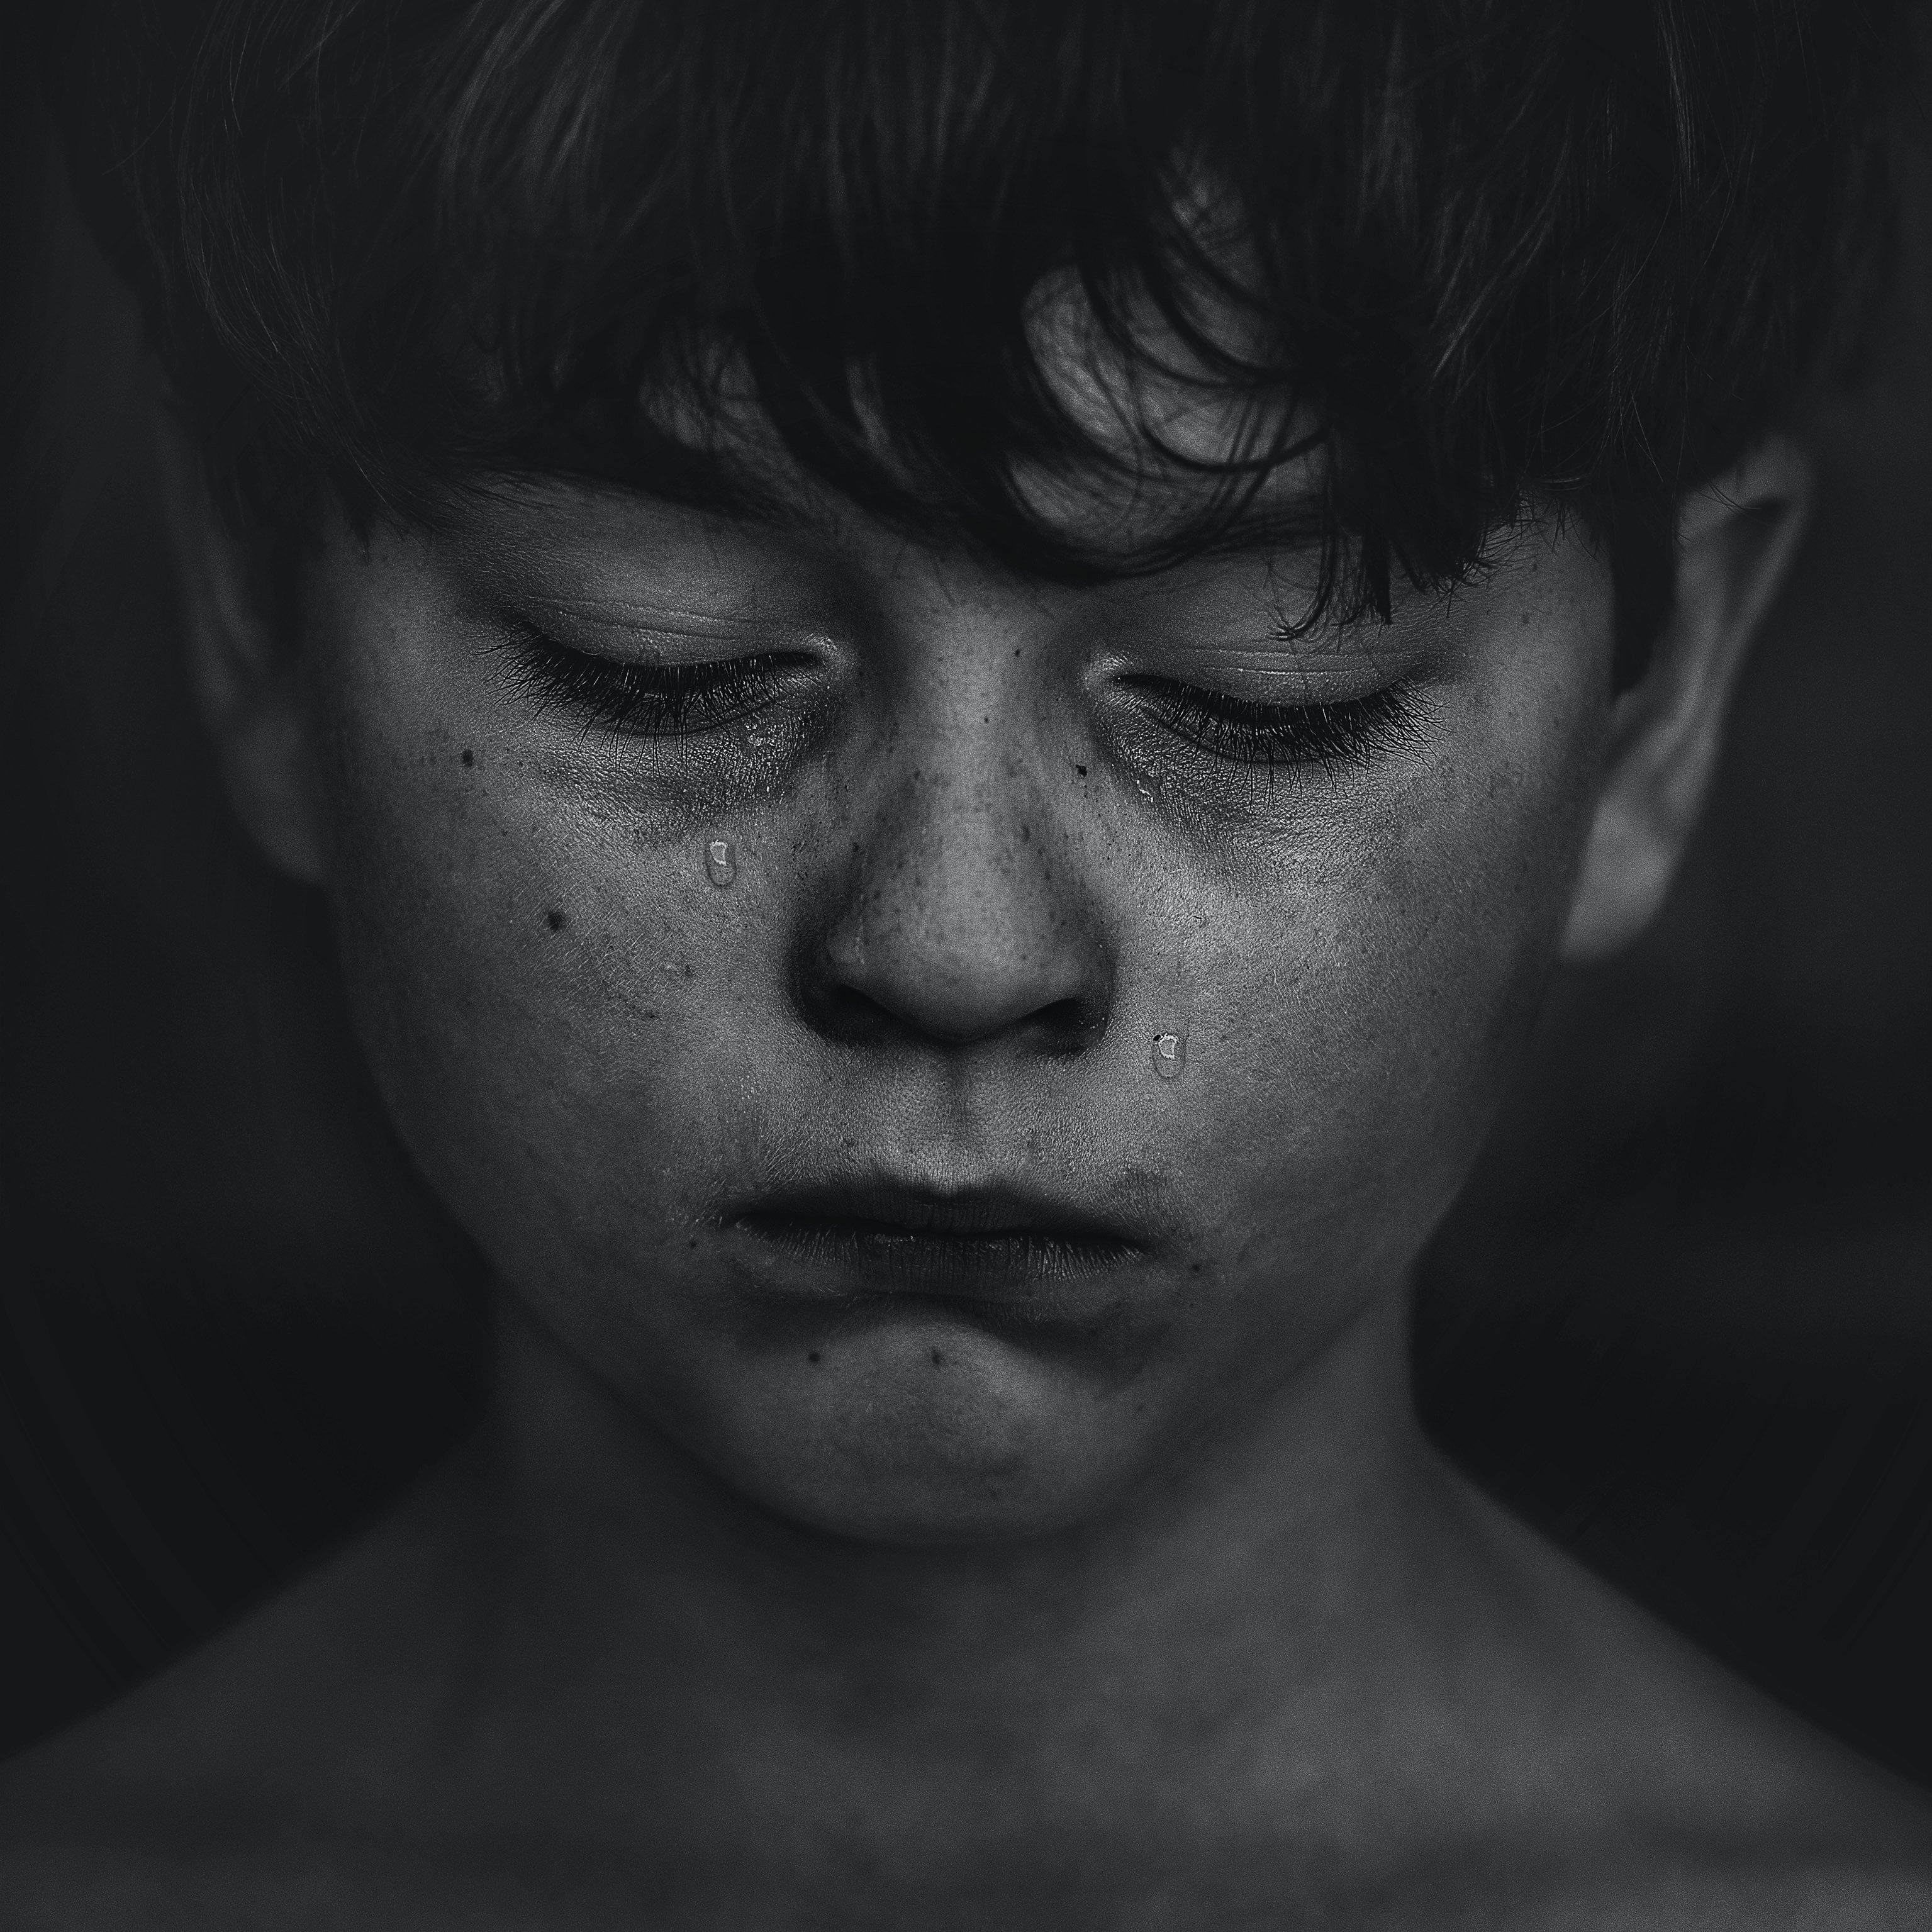 Victor had lost his parents very young. | Source: Unsplash